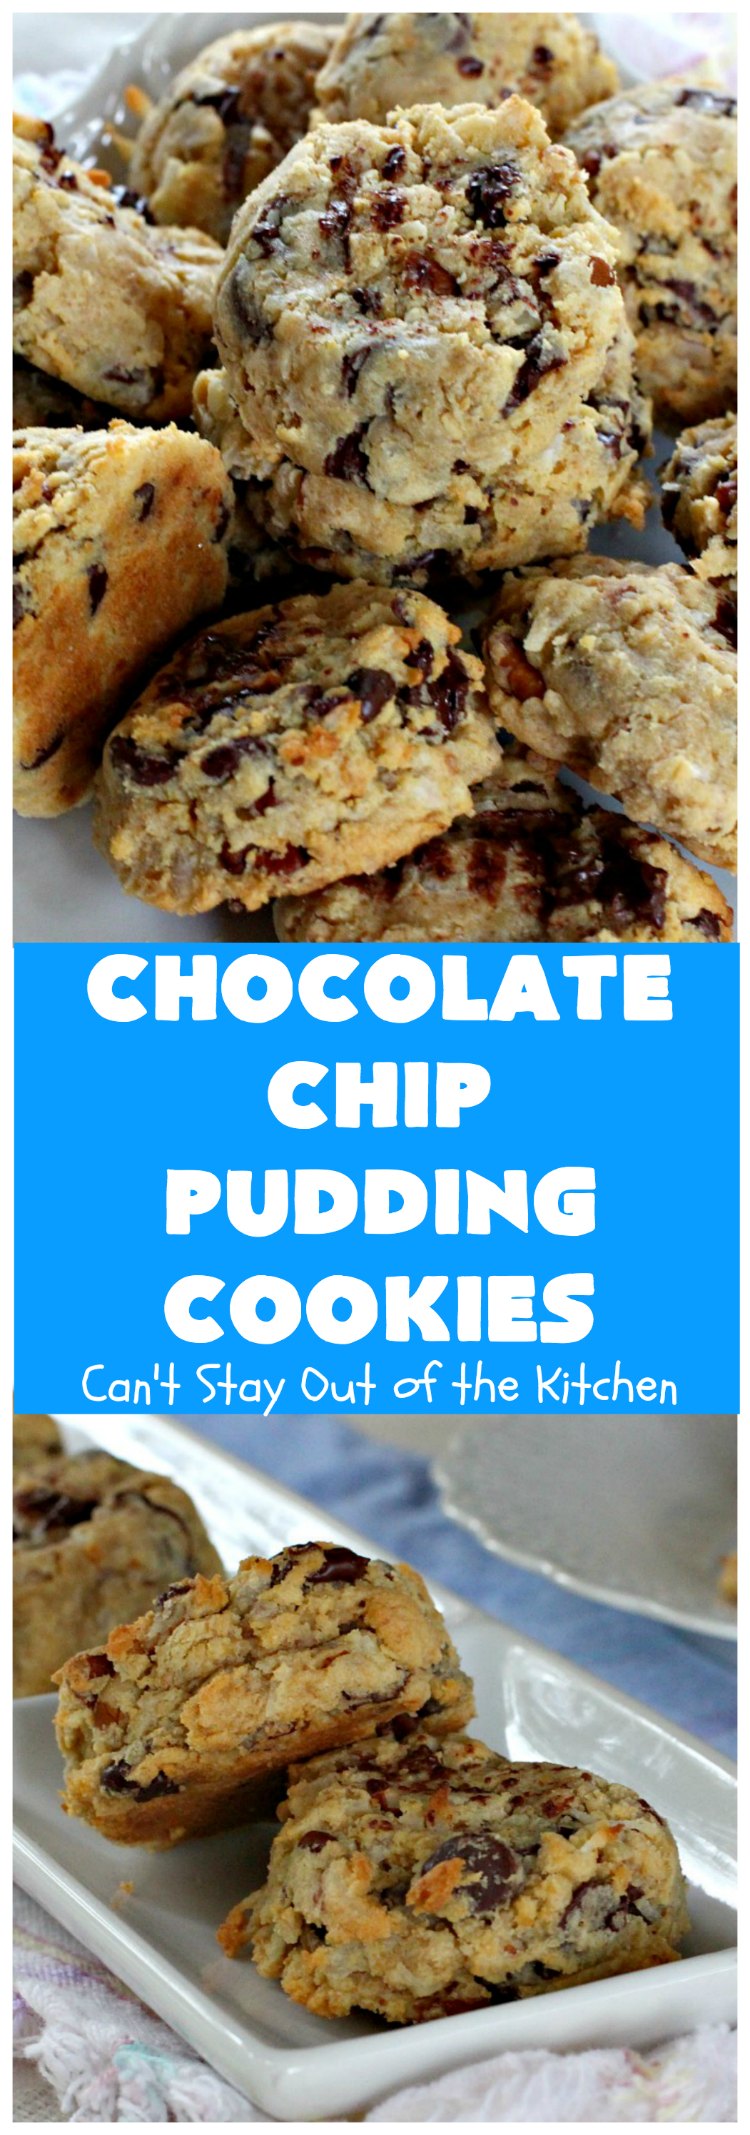 Chocolate Chip Pudding Cookies | Can't Stay Out of the Kitchen